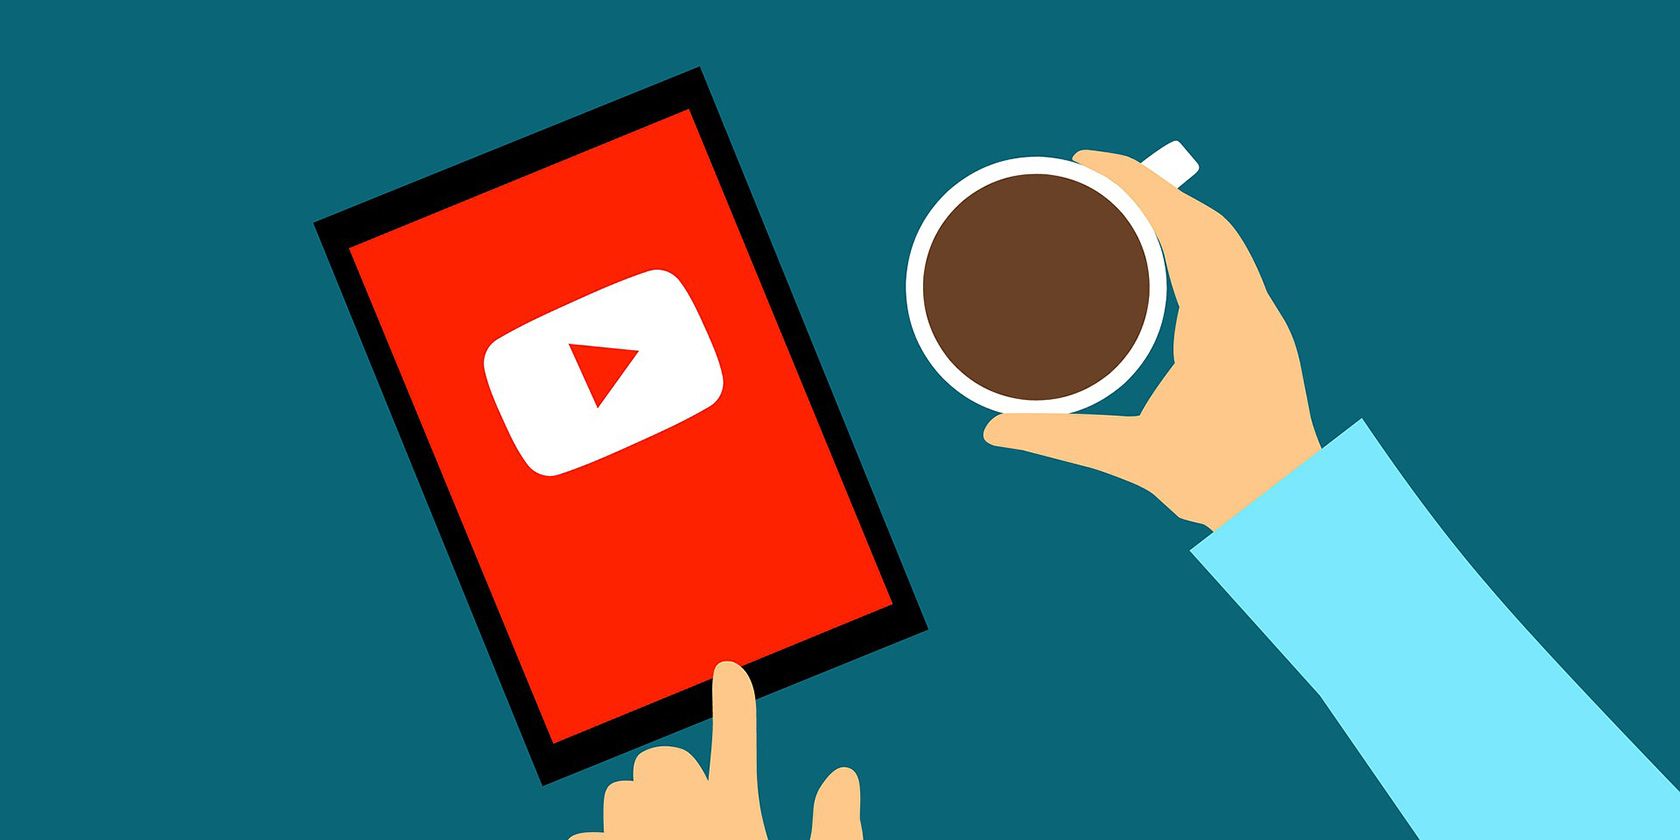 Sick of Irrelevant YouTube Recommendations? Here's What You Need to Do